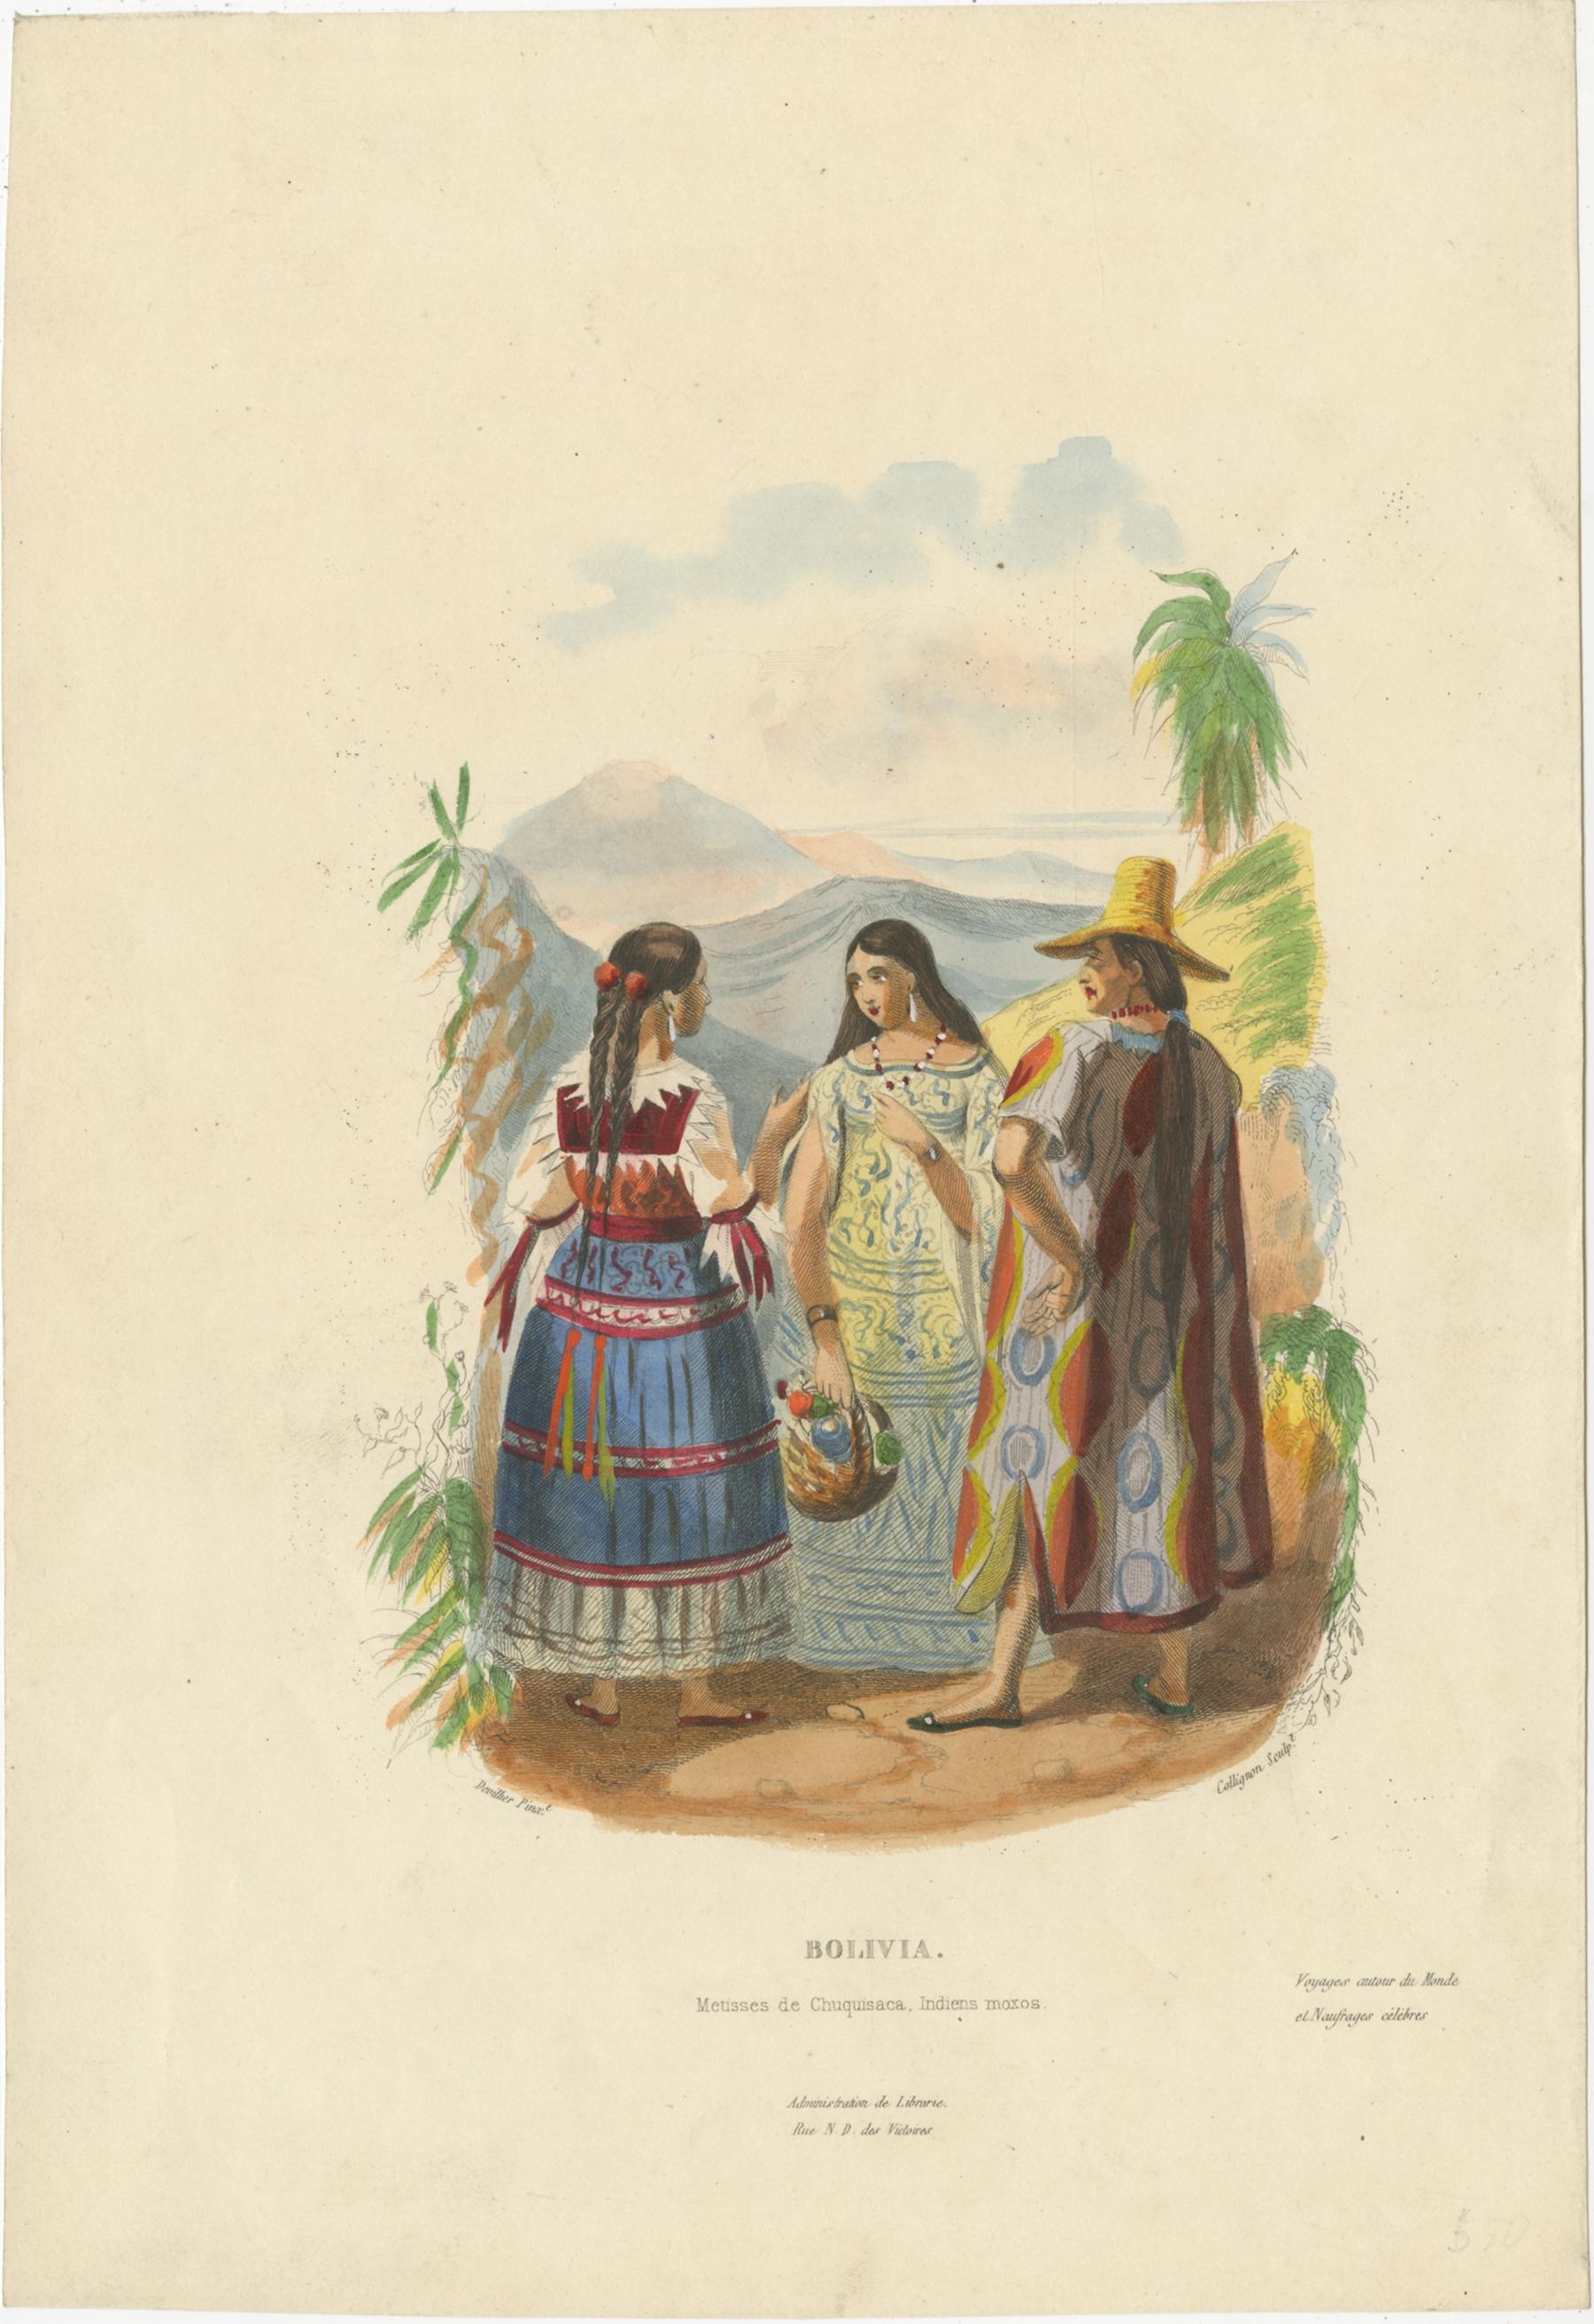 Antique print titled 'Bolivia'. 

Original antique print of two women and a man from Bolivia. This print originates from a work by Captain Gabriel-Pierre Lafond and illustrates people from remote and exotic lands in an era of travel and